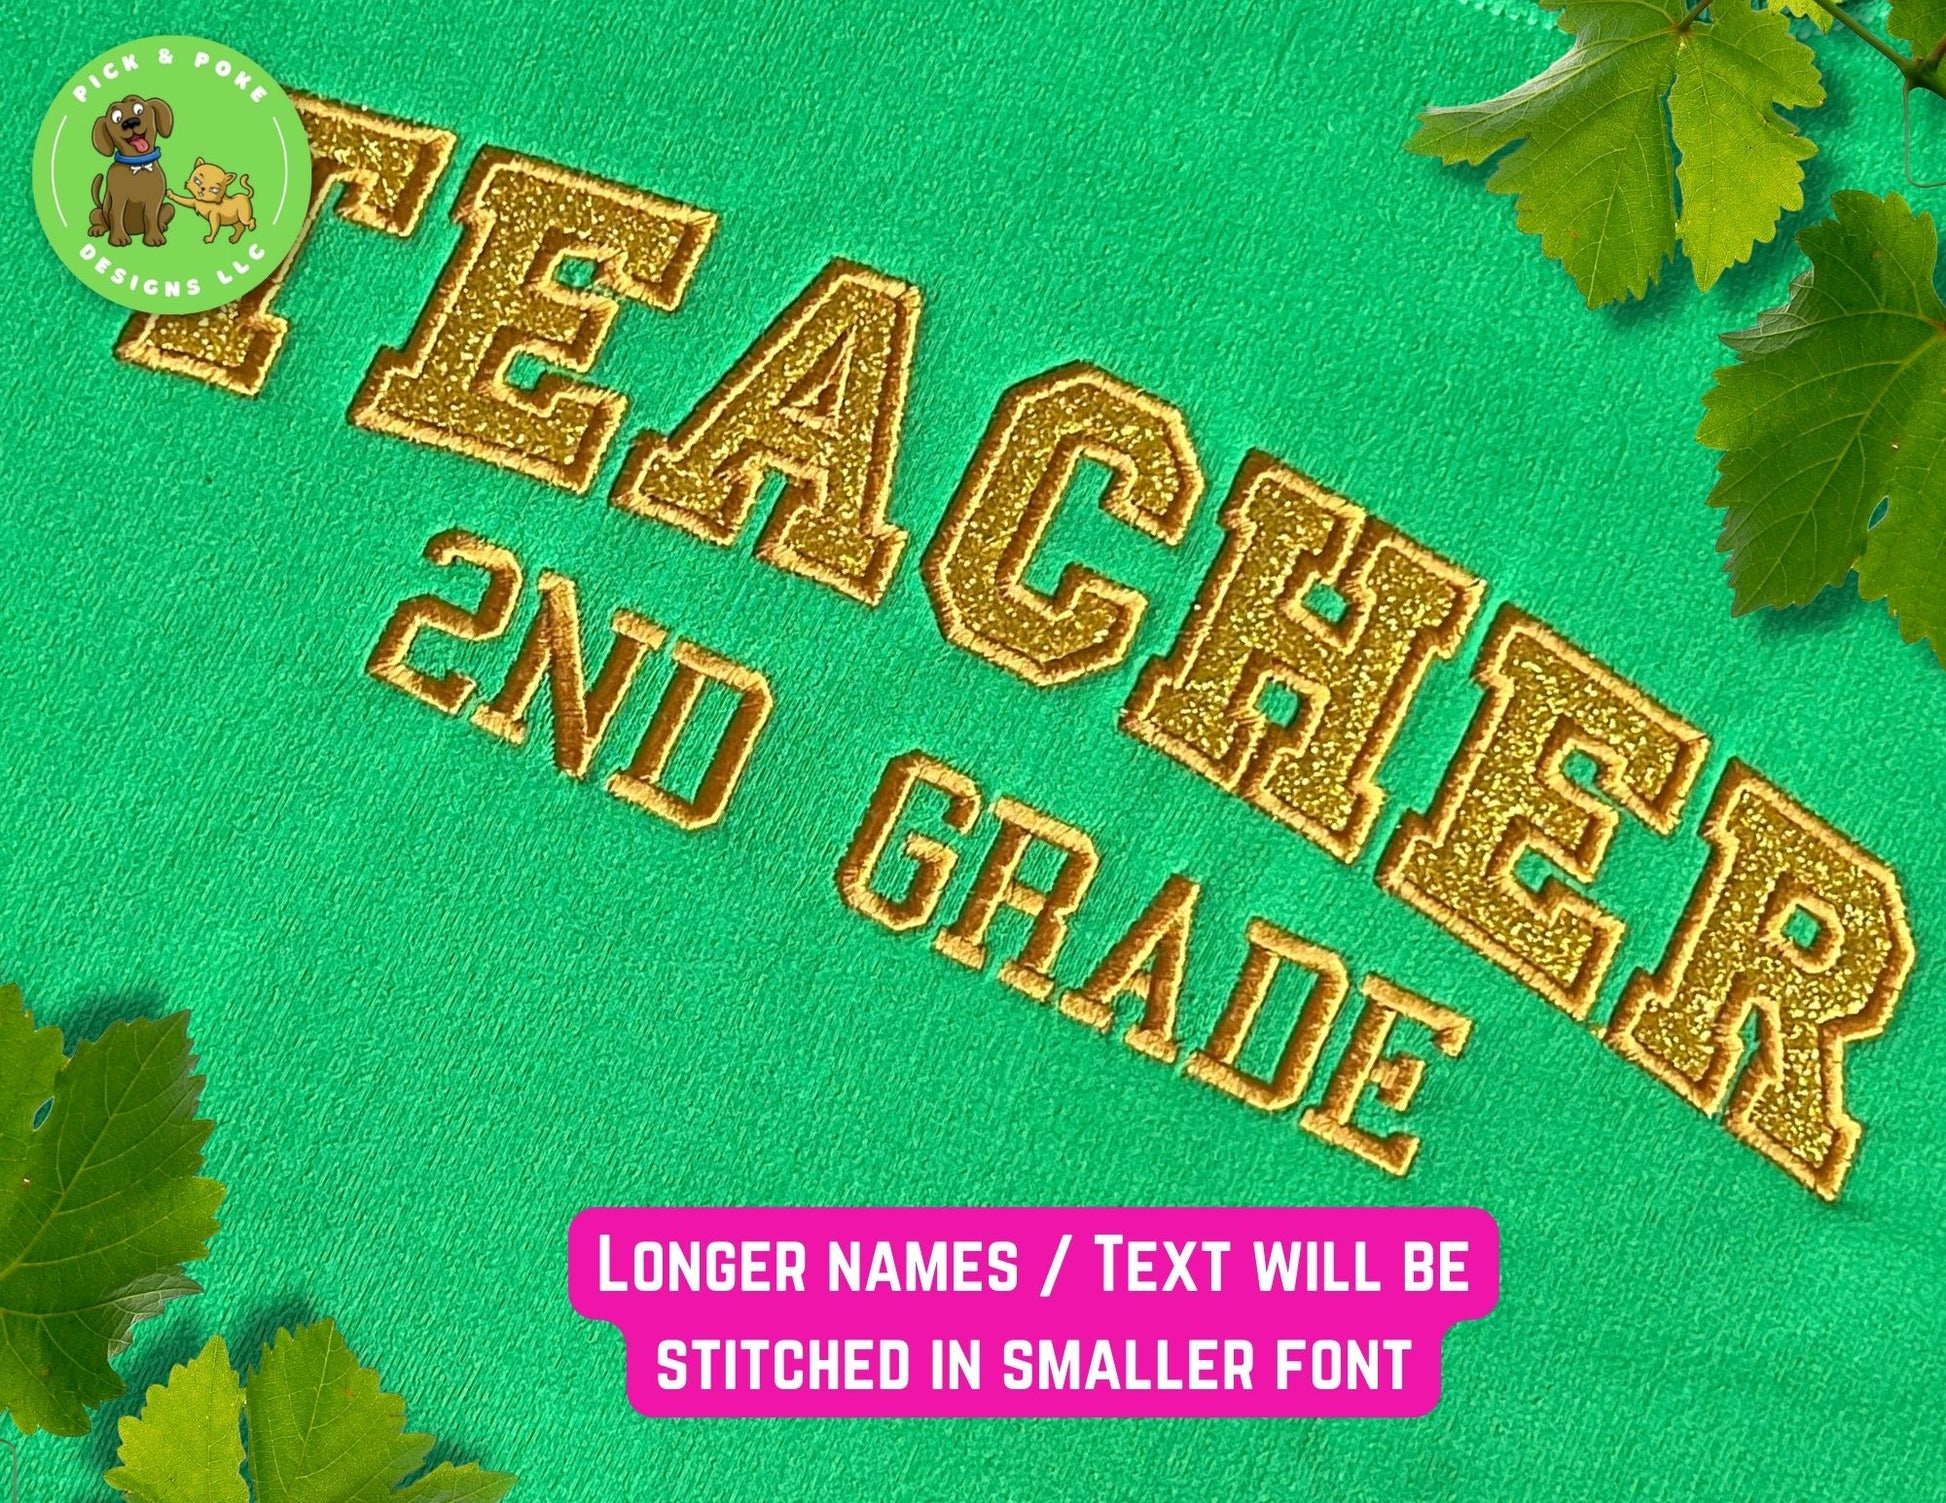 Longer names and text will be stitched using a smaller font size.